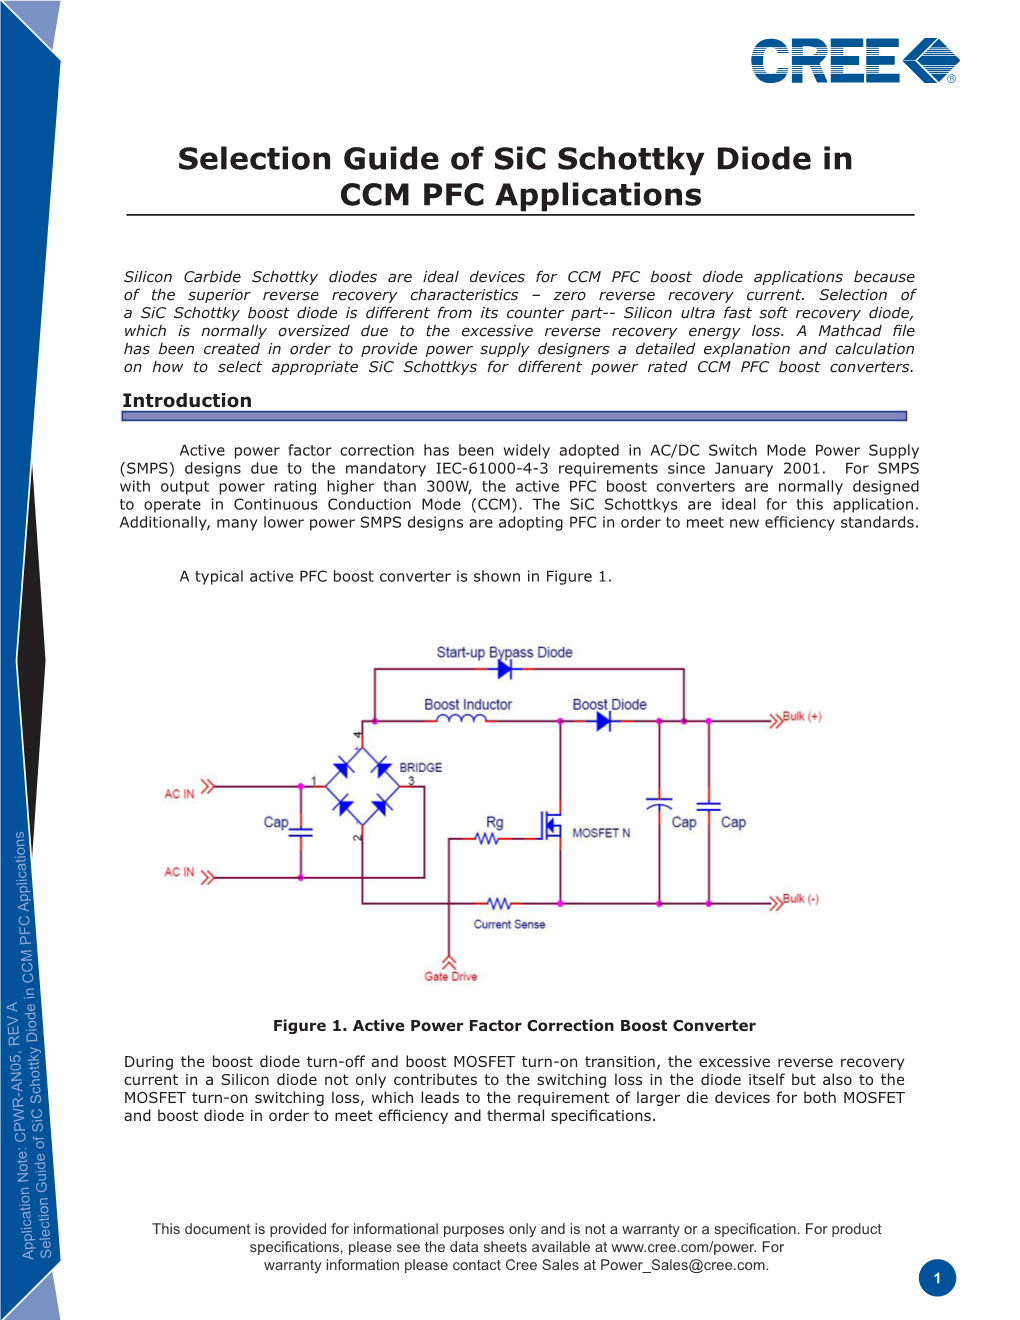 Selection Guide of Sic Schottky Diode in CCM PFC Applications